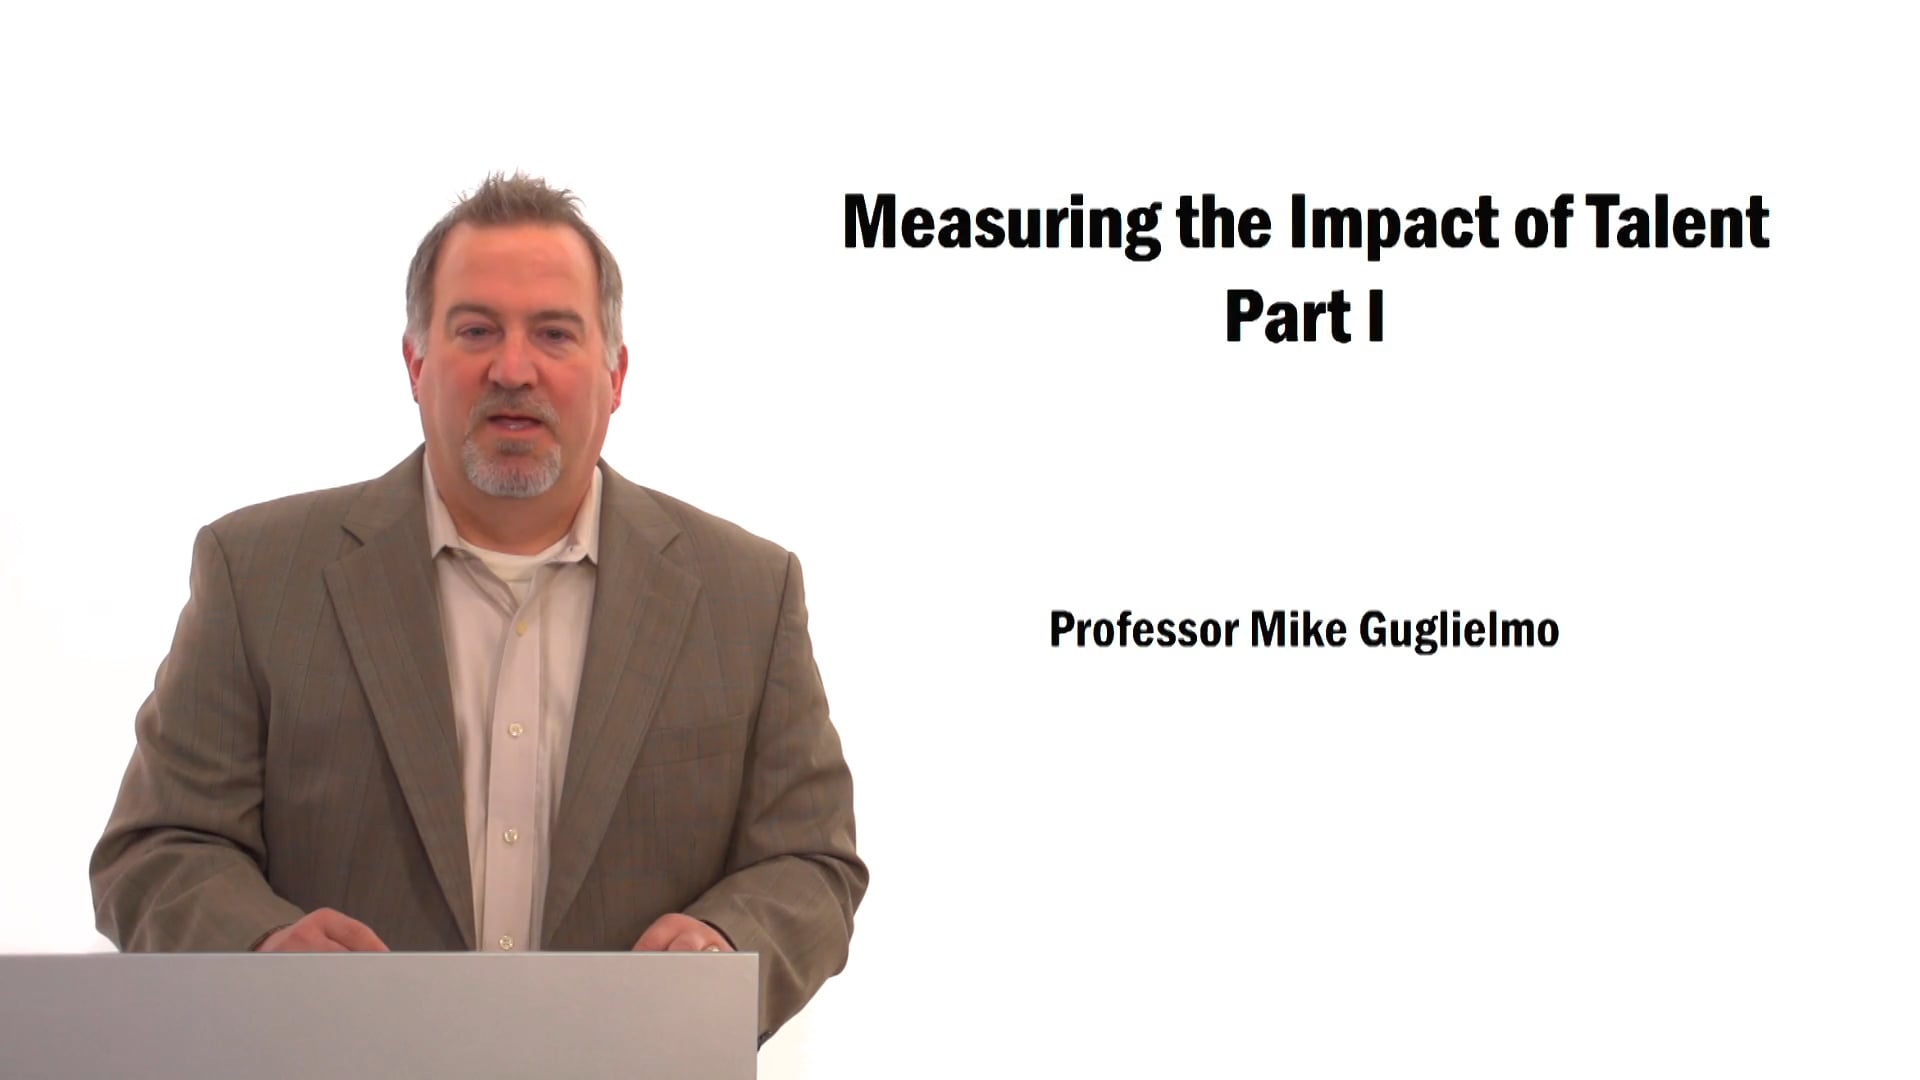 Measuring the Impact of Talent Part 1